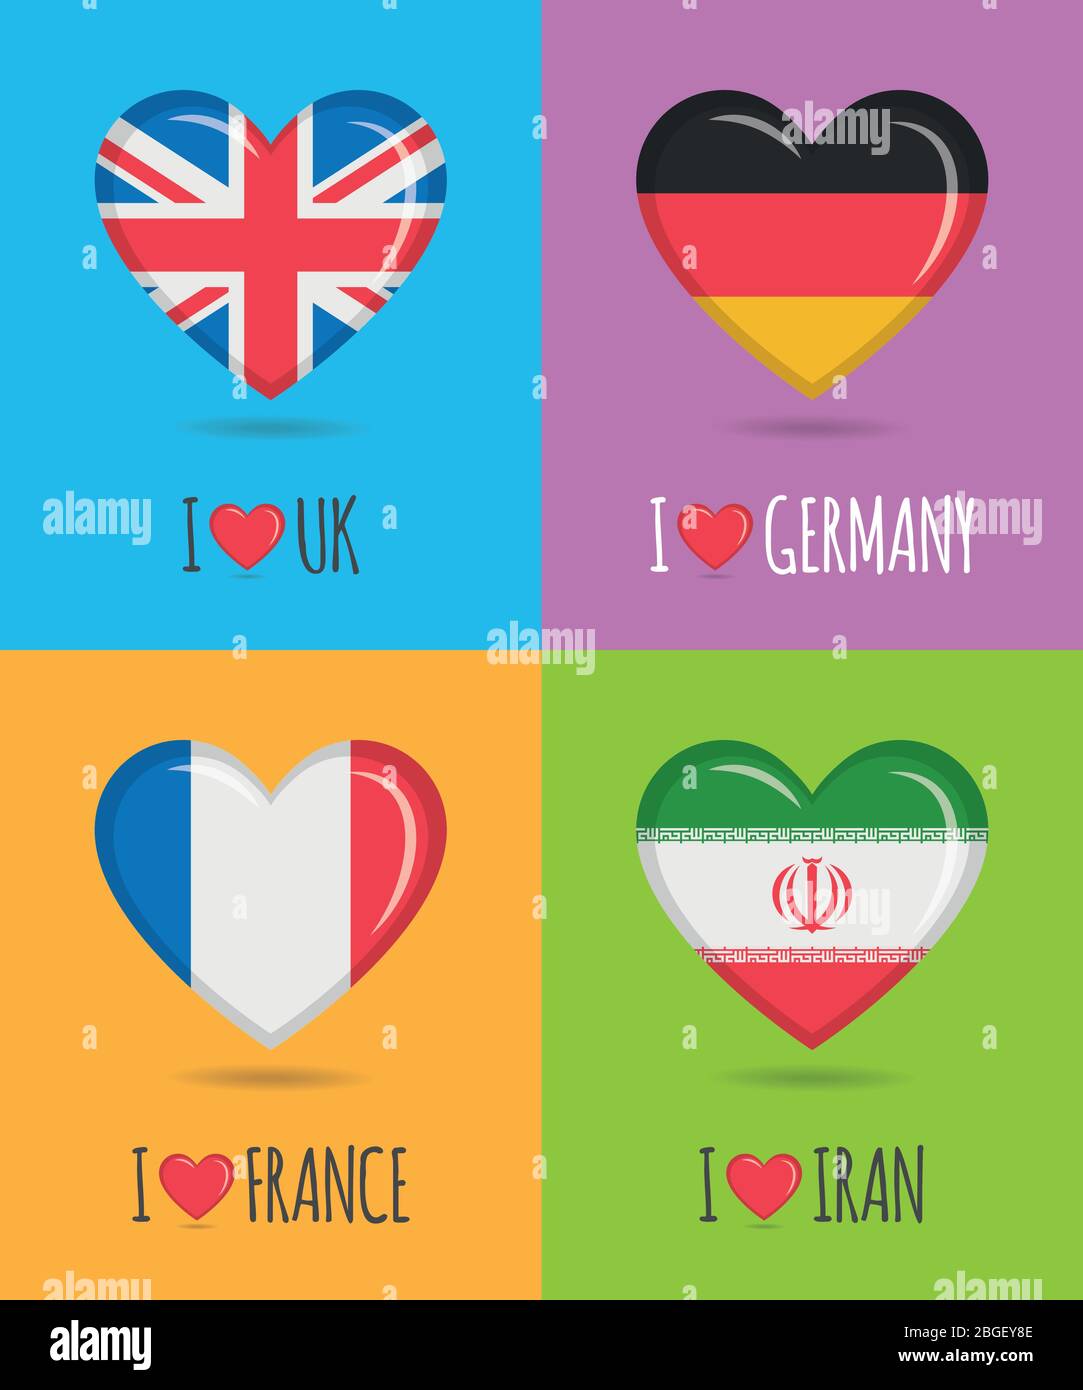 Loving and colorful posters of UK, Germany, France and Iran with heart shaped national flag and text Vector illustration Stock Vector